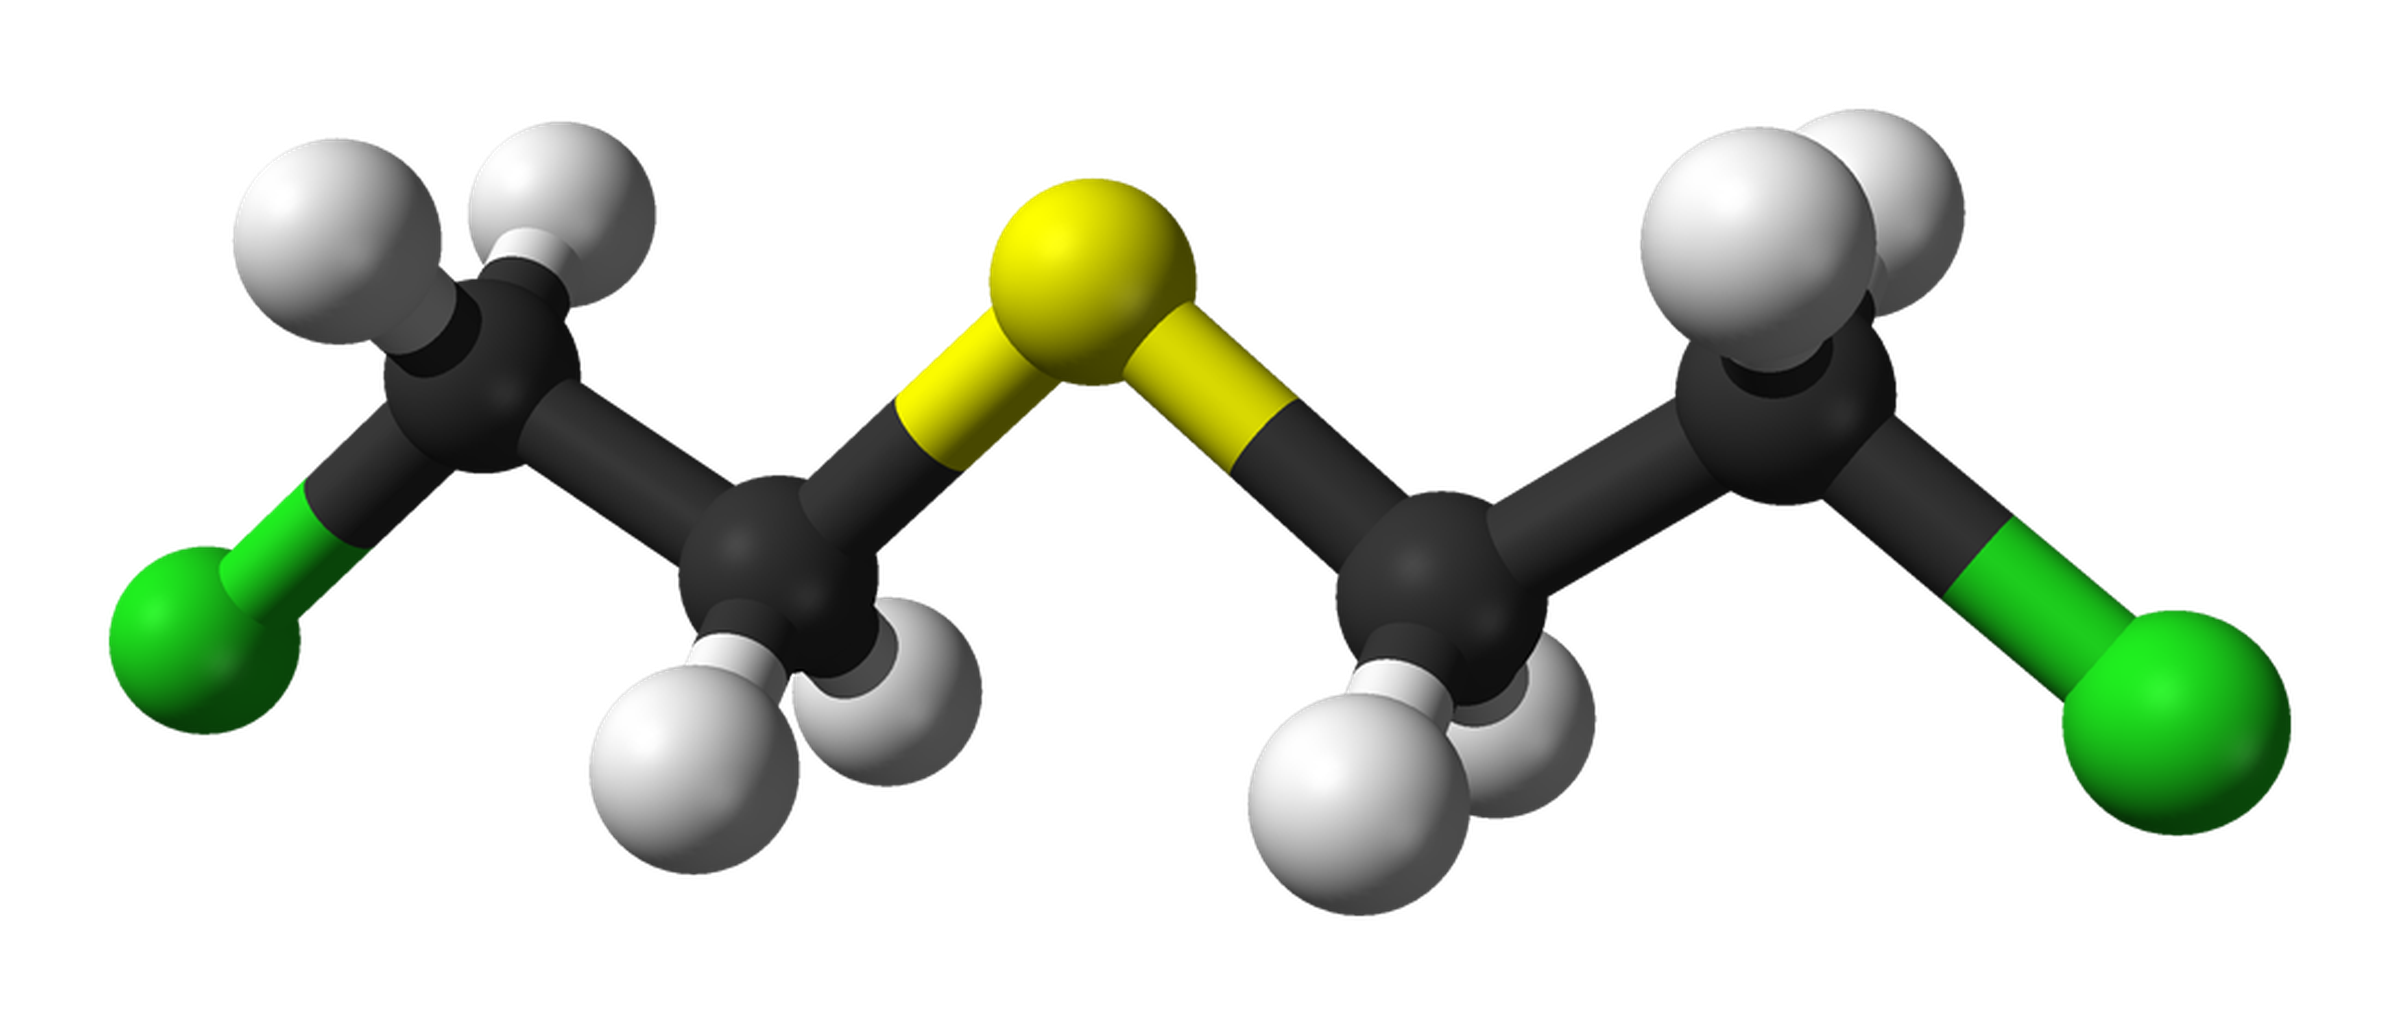 The chemical structure of mustard gas, with sulfur (yellow) in the middle connected to two wings. Both wings contain two carbon atoms (black), each bound to two hydrogen atoms (white). Chlorine atoms (green) bracket the entire structure on either end.